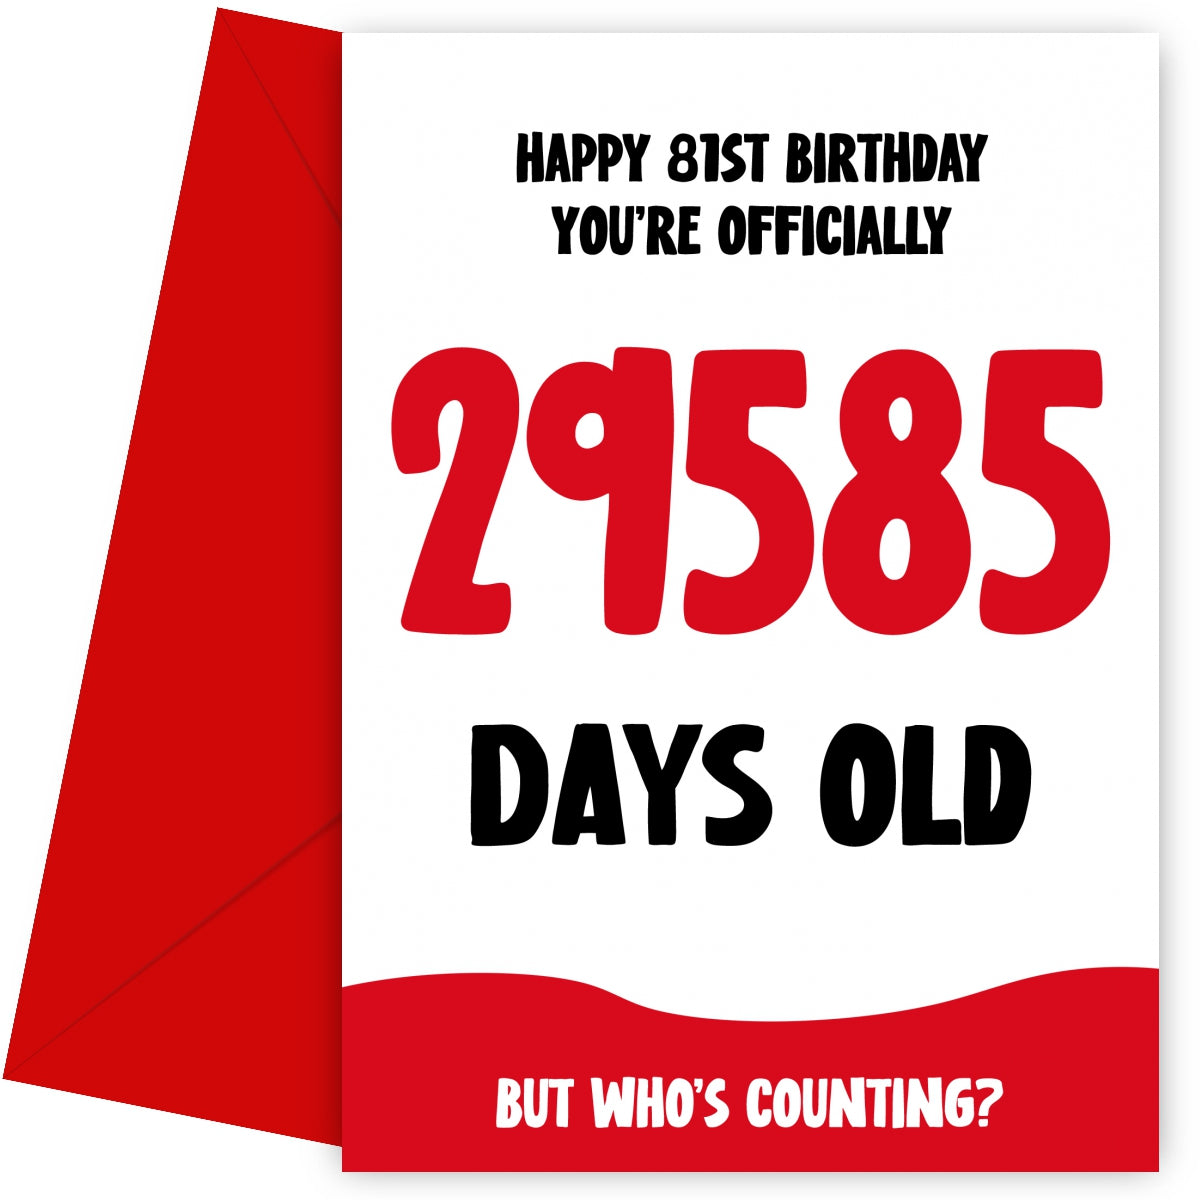 Funny 81st Birthday Card for Men and Women - 29585 Days Old